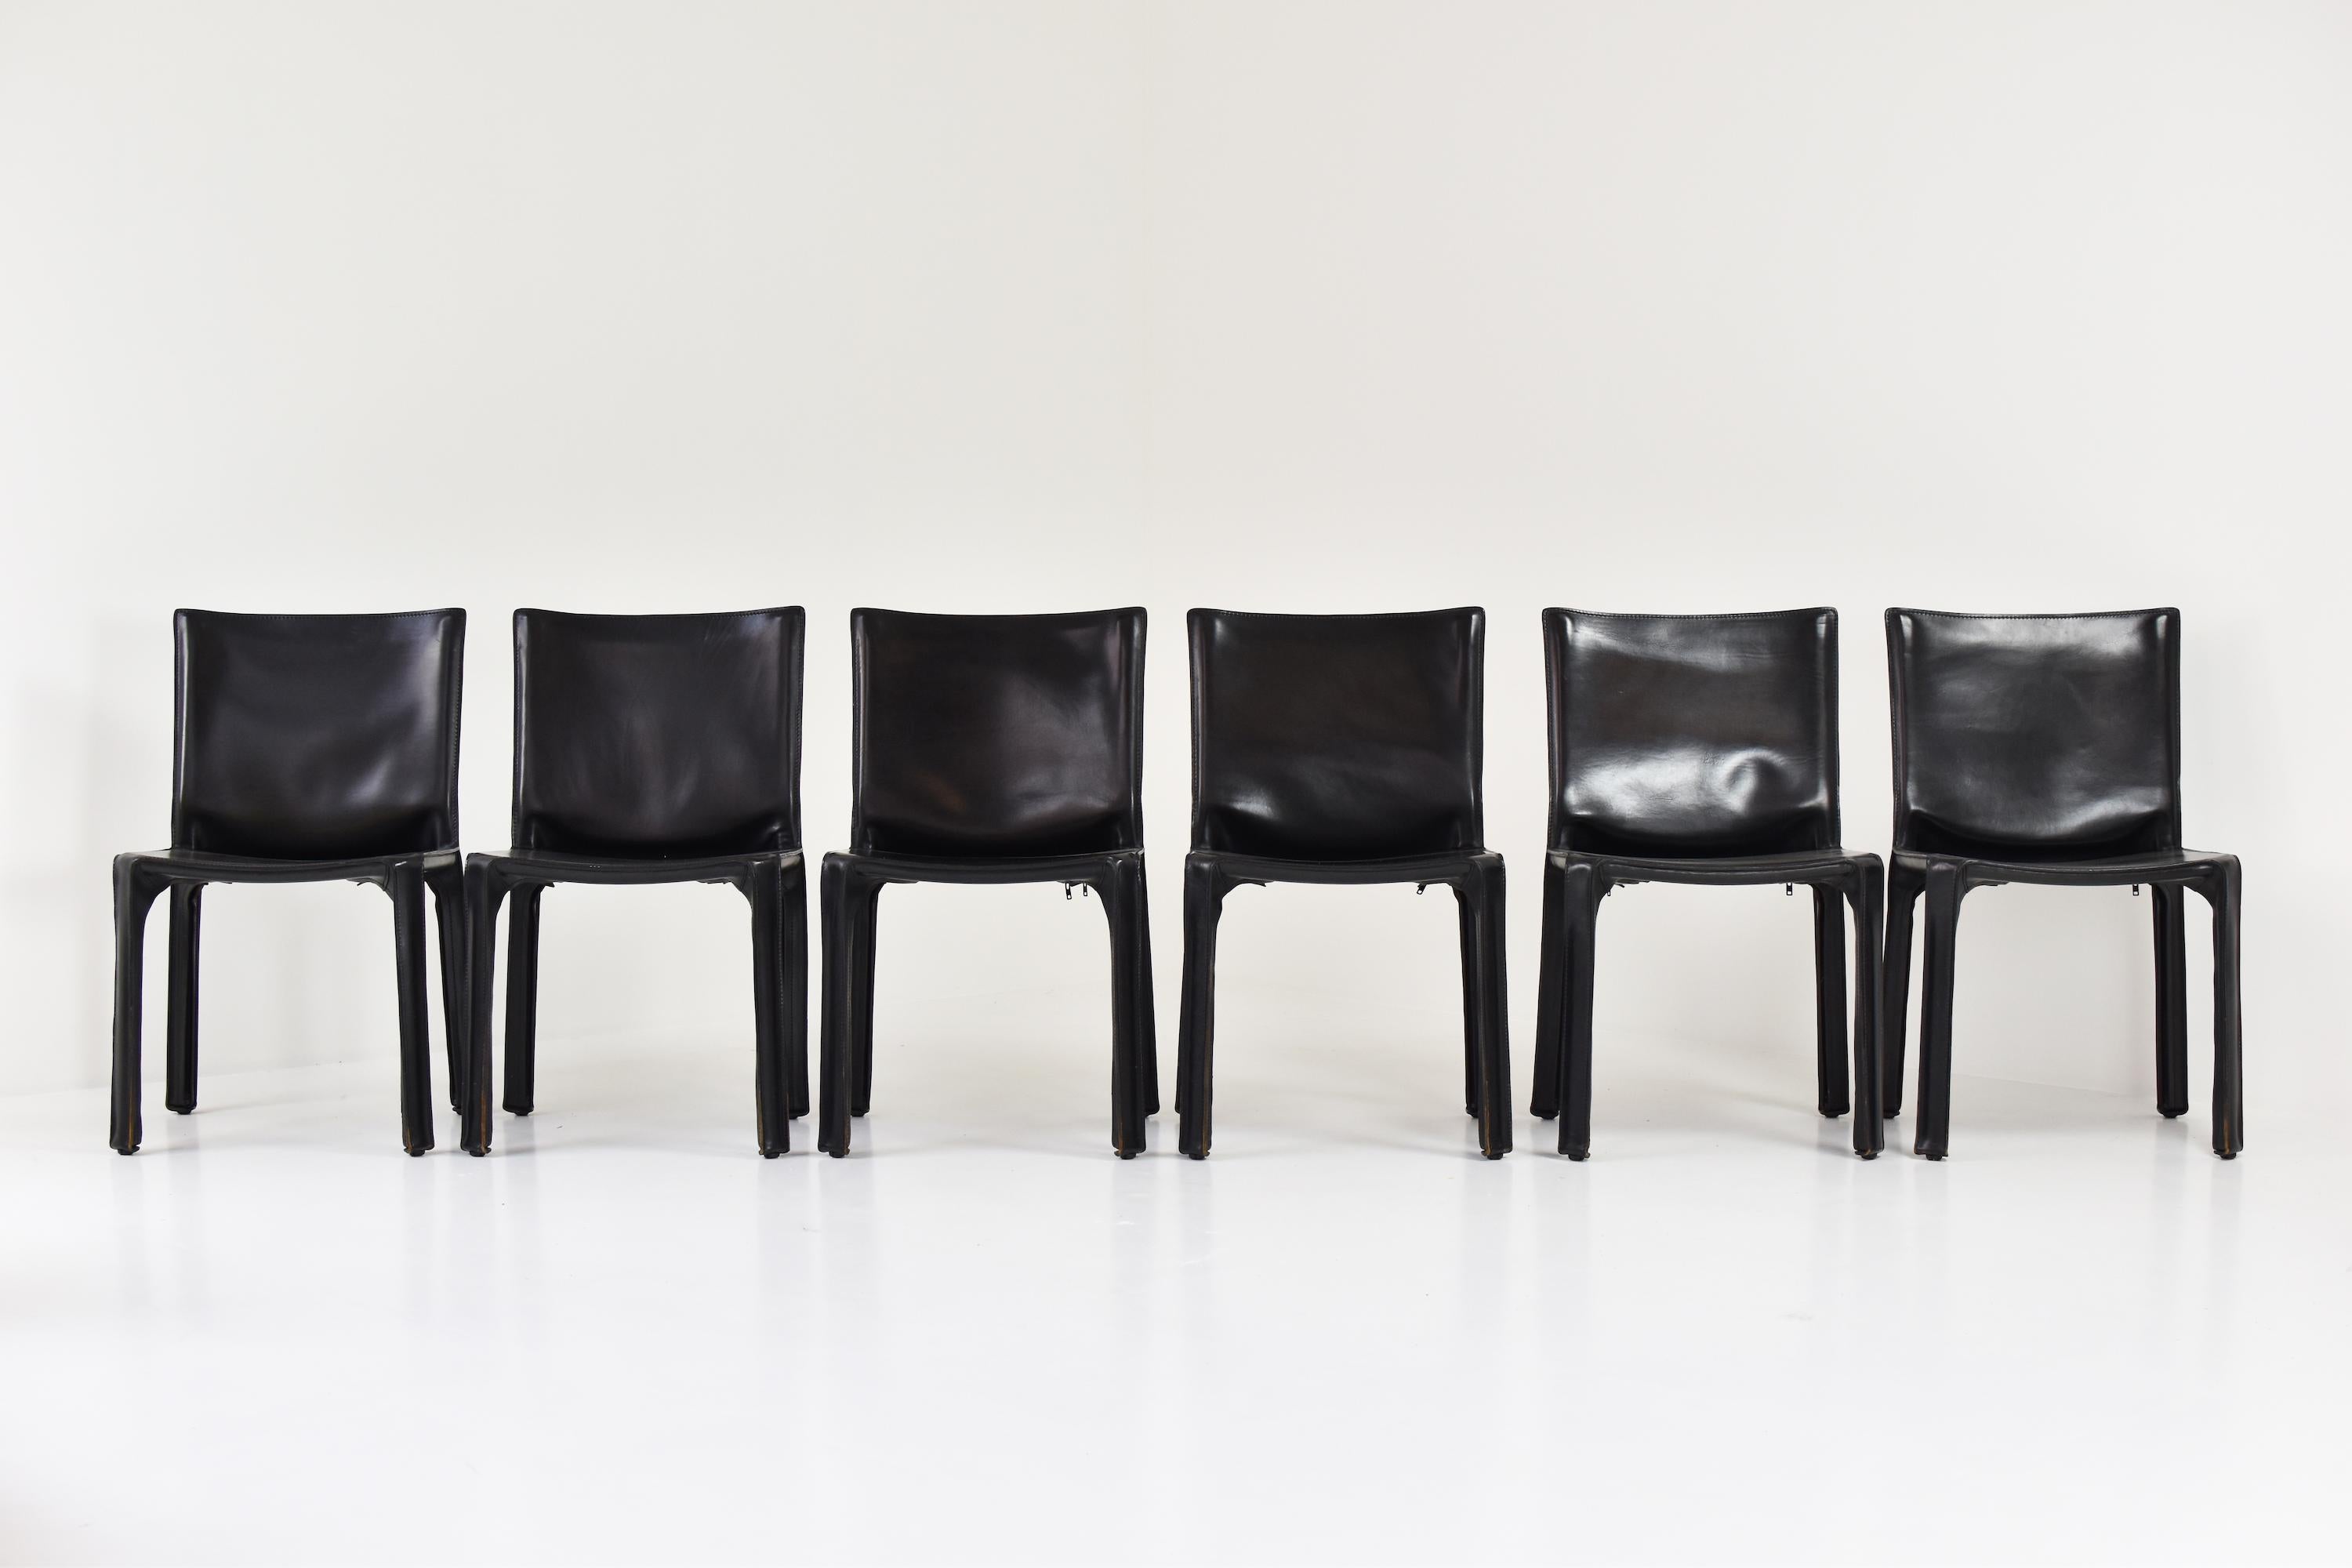 Set of 6 “413” CAB chairs designed by Mario Bellini and manufactured by Cassina, Italy, 1977. These high-quality chairs consist of handstitched black leather upholstery wrapped over an internal steel frame. Very good original condition. Labeled.